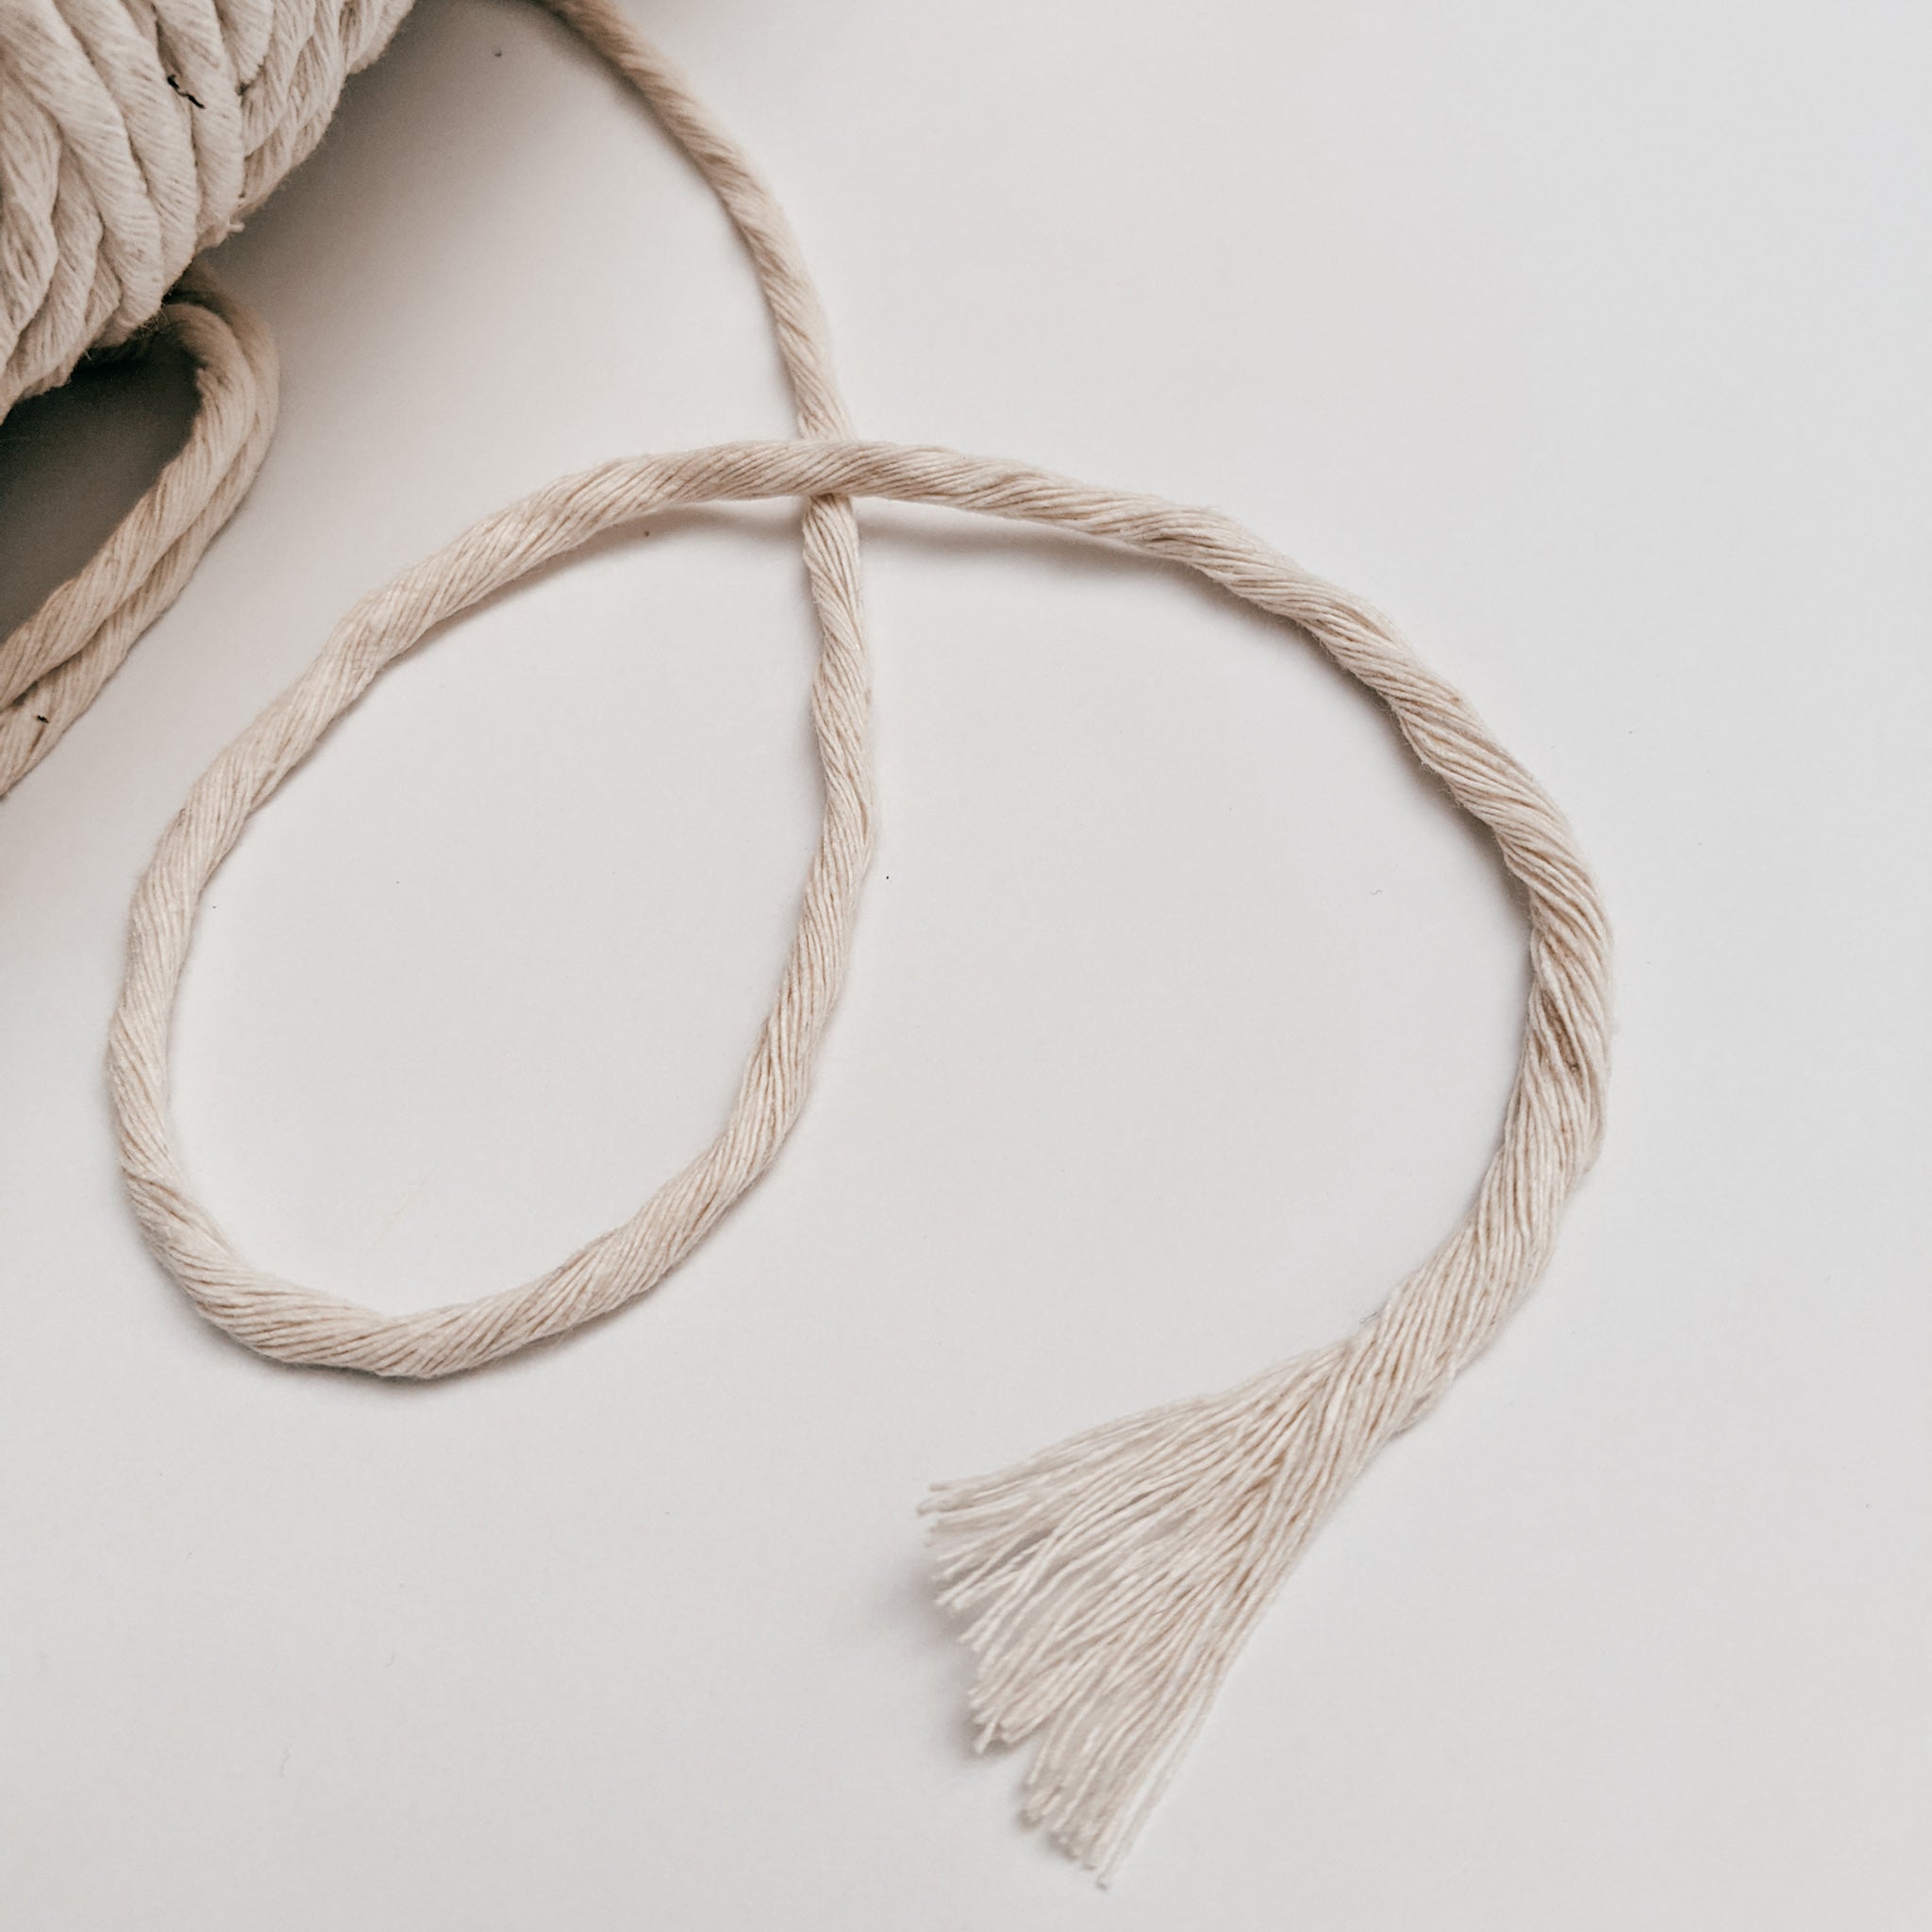 IVORY // 100 ft of 3mm Single Twist Cotton Cord